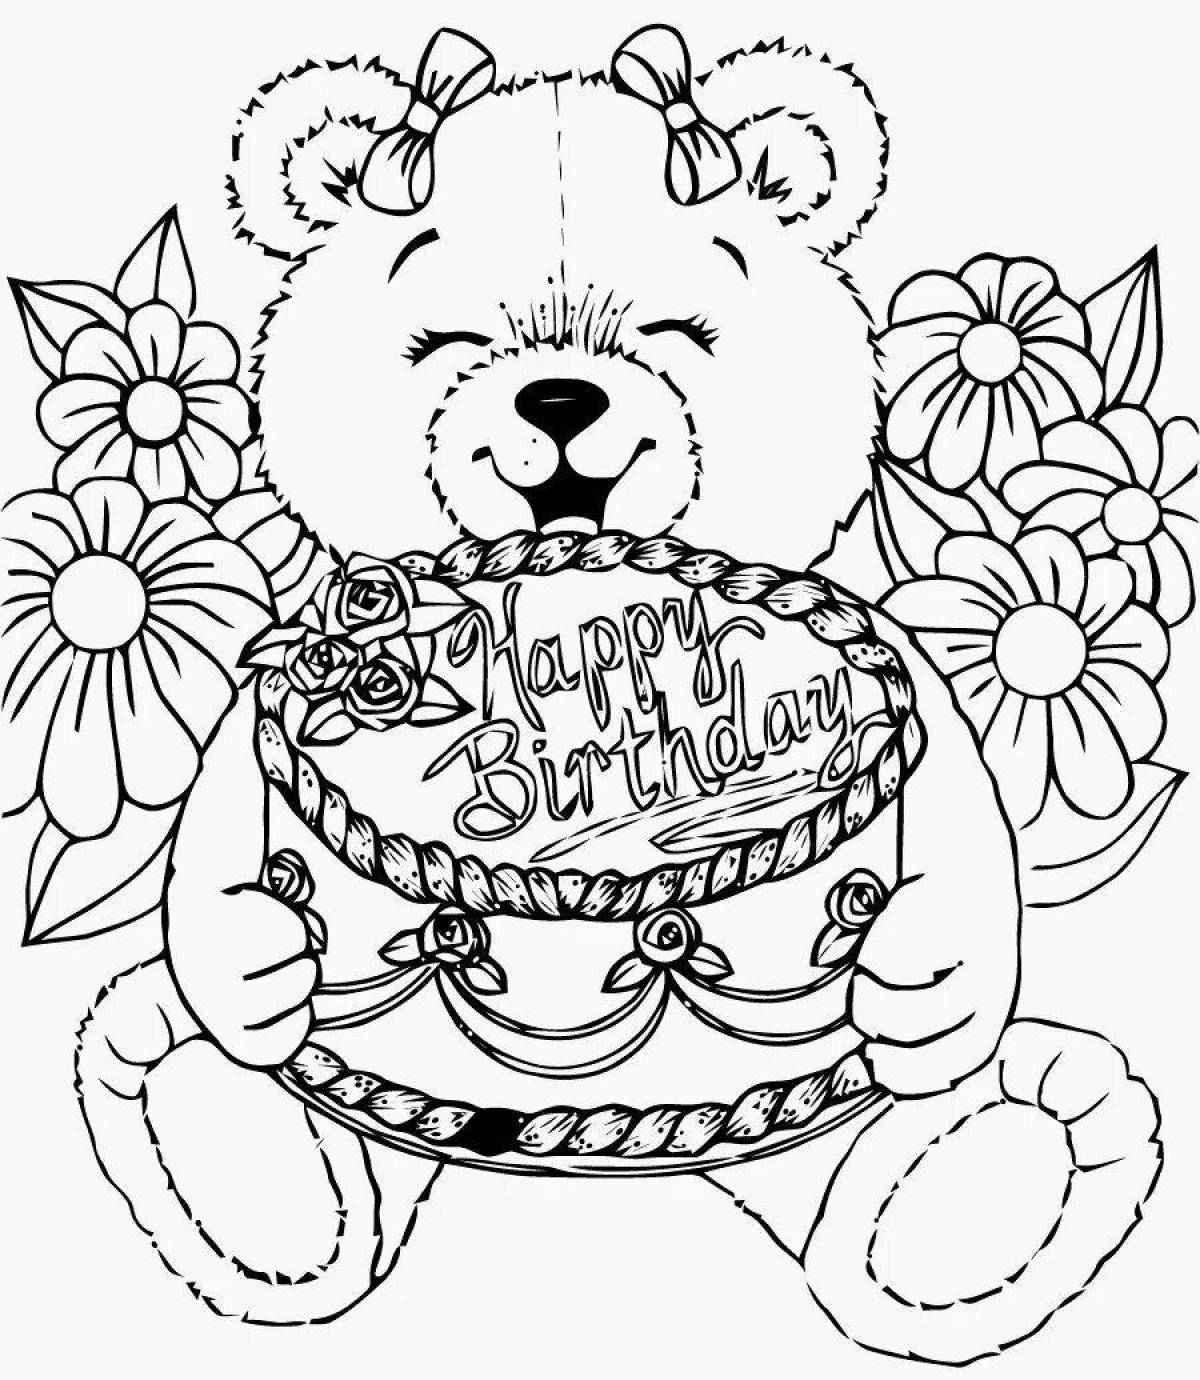 Colorful birthday present for mom coloring book